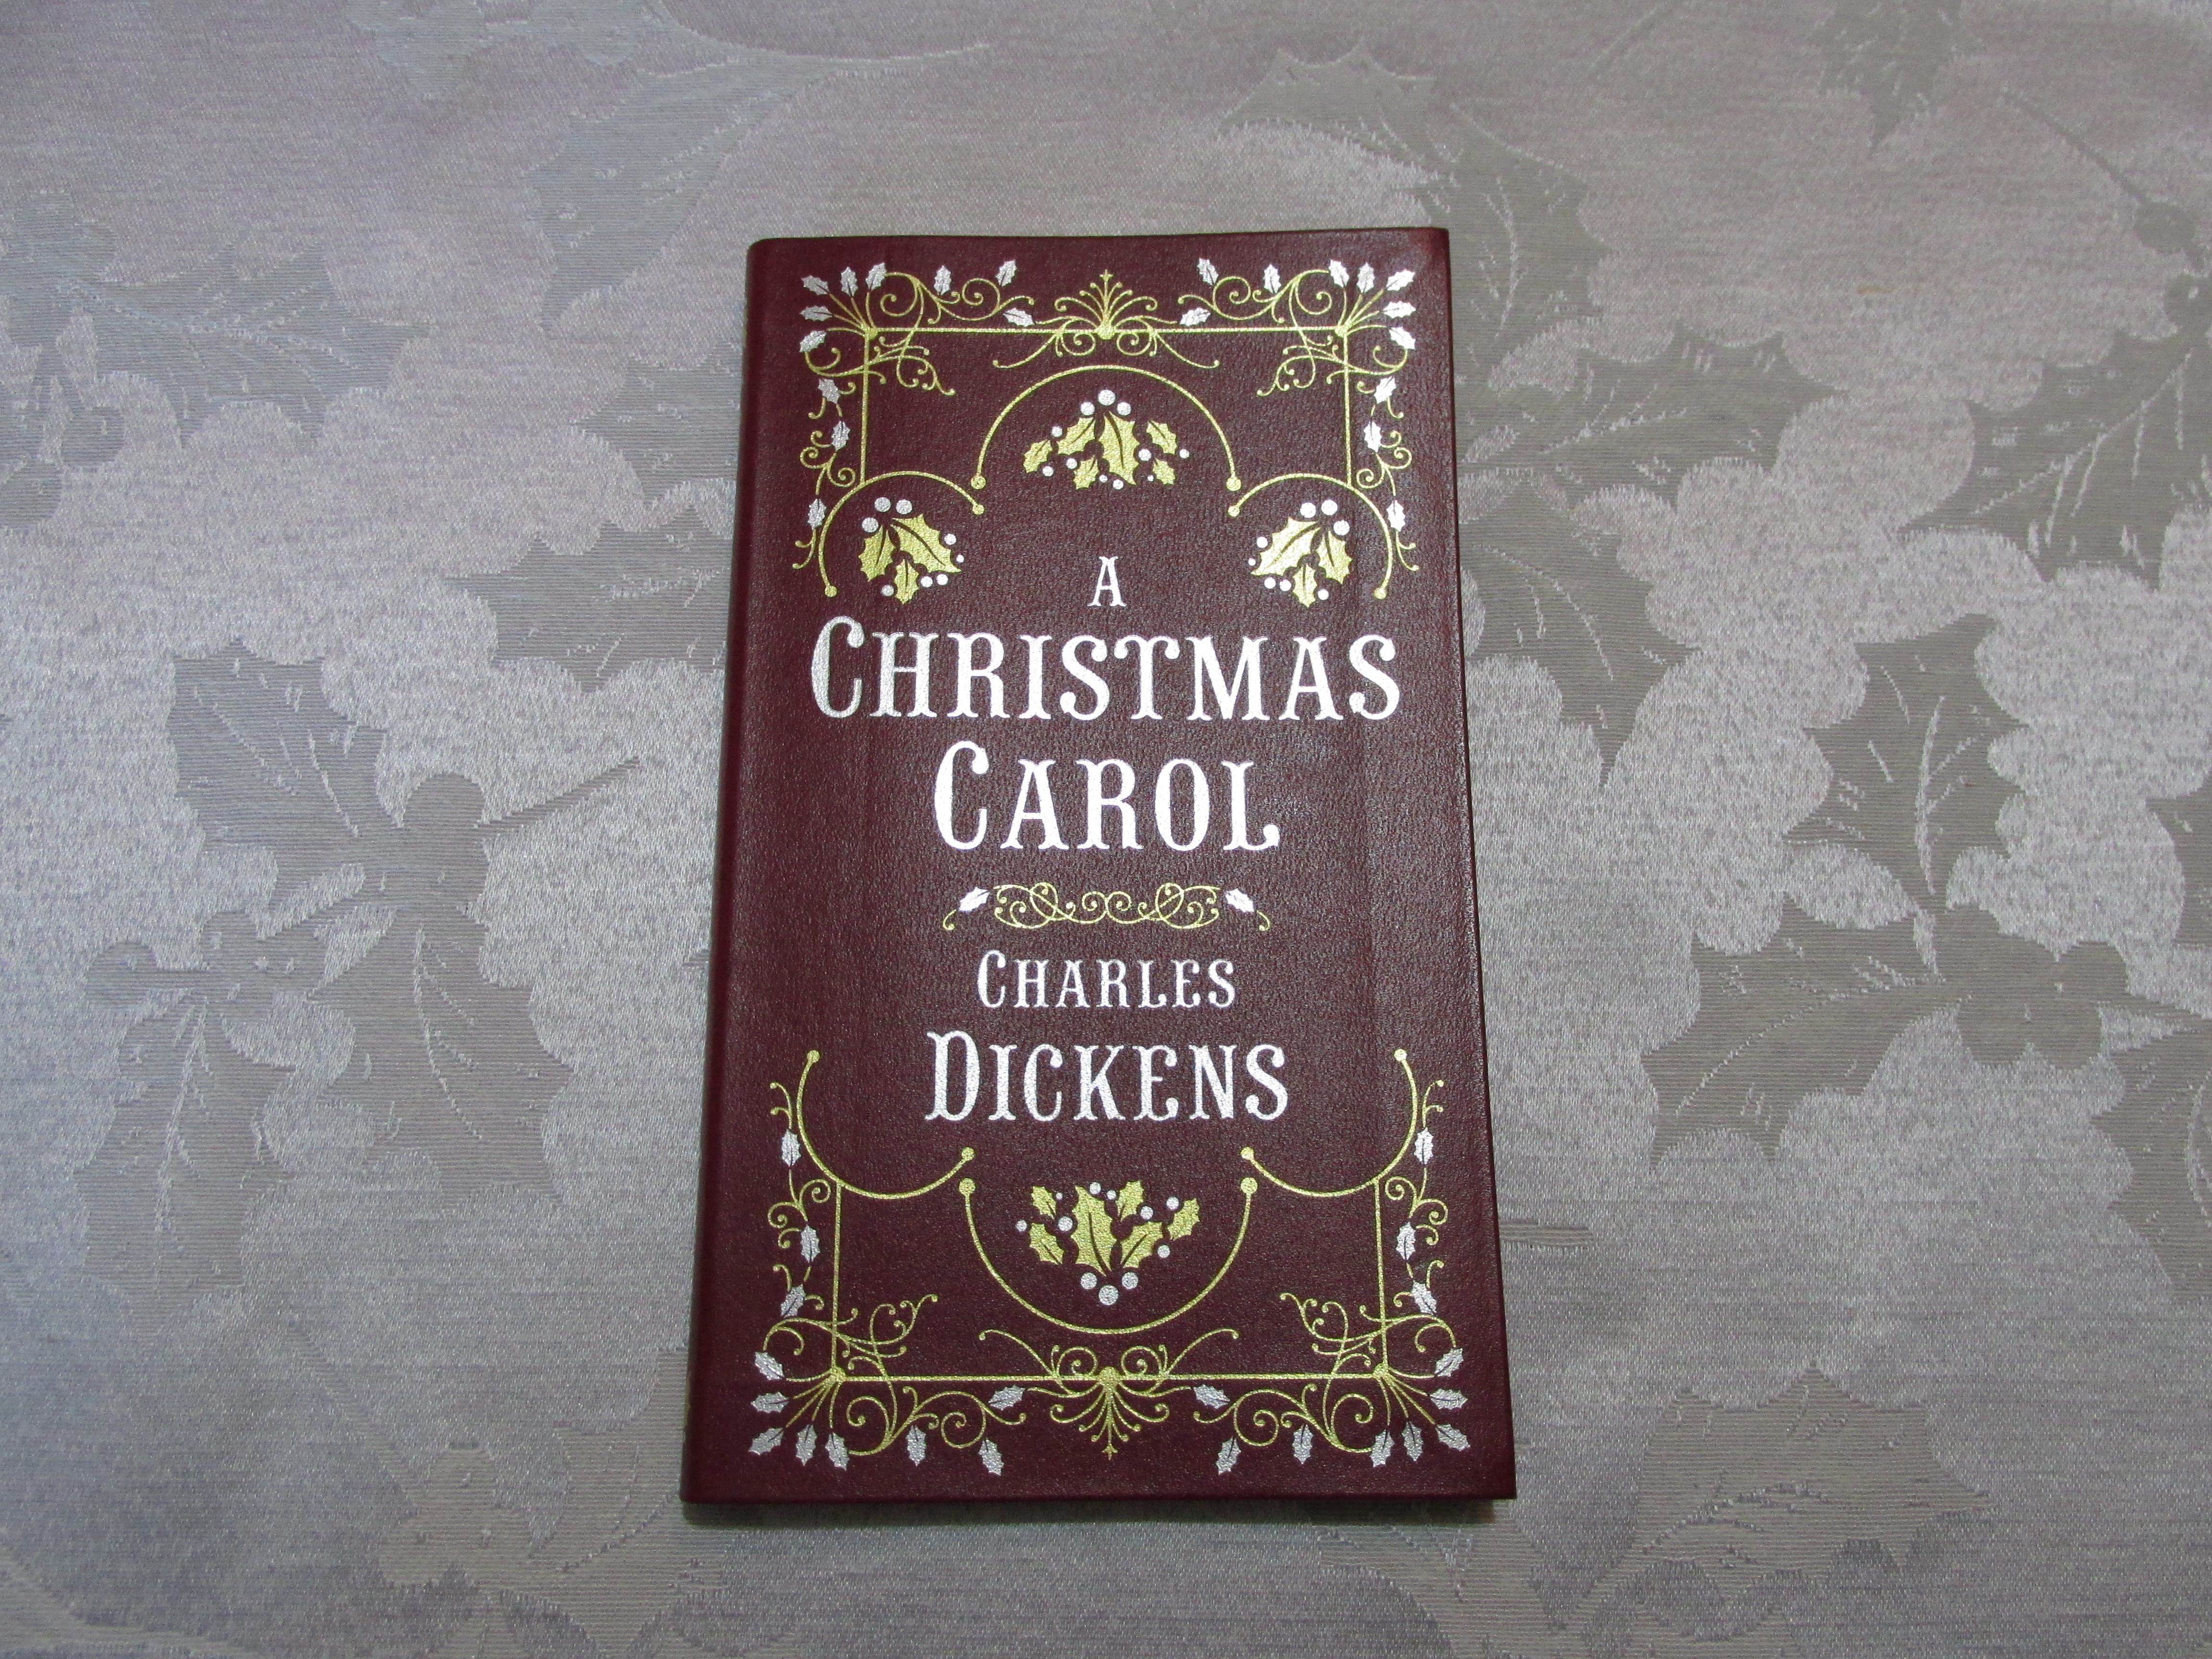 Three Reasons A Christmas Carol by Charles Dickens is a Classic - Almost An Author